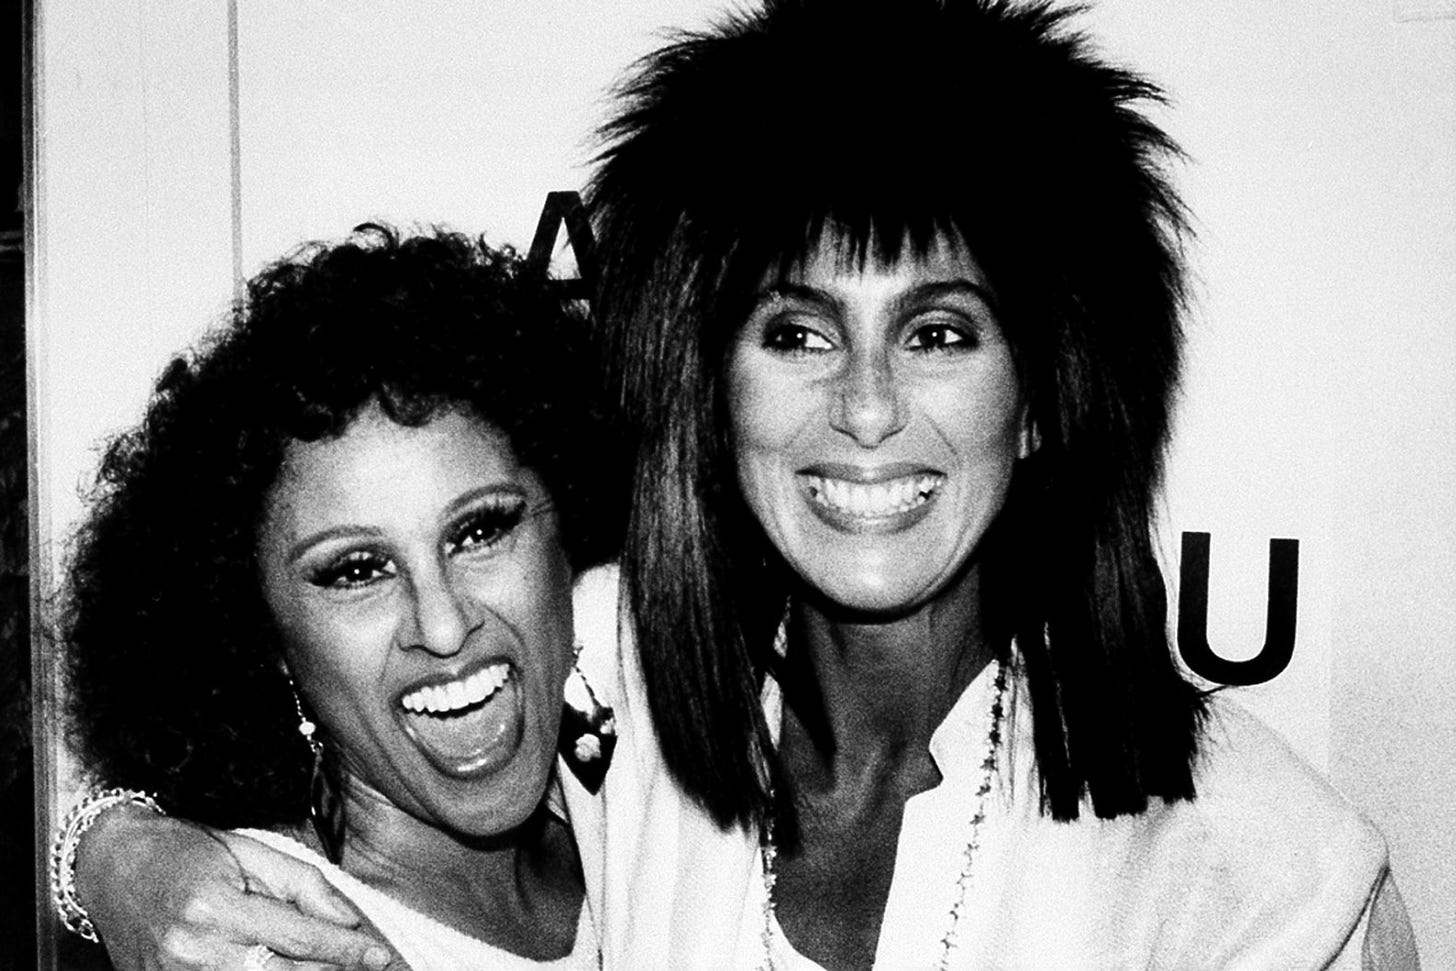 Cher hugs her friend Darlene Love after a performance of "Leader of the Pack" at the Ambassador Theatre in New York City, Friday night, July 20, 1985.  Love is starring in the Broadway musical.  (AP Photo/Frankie Ziths)